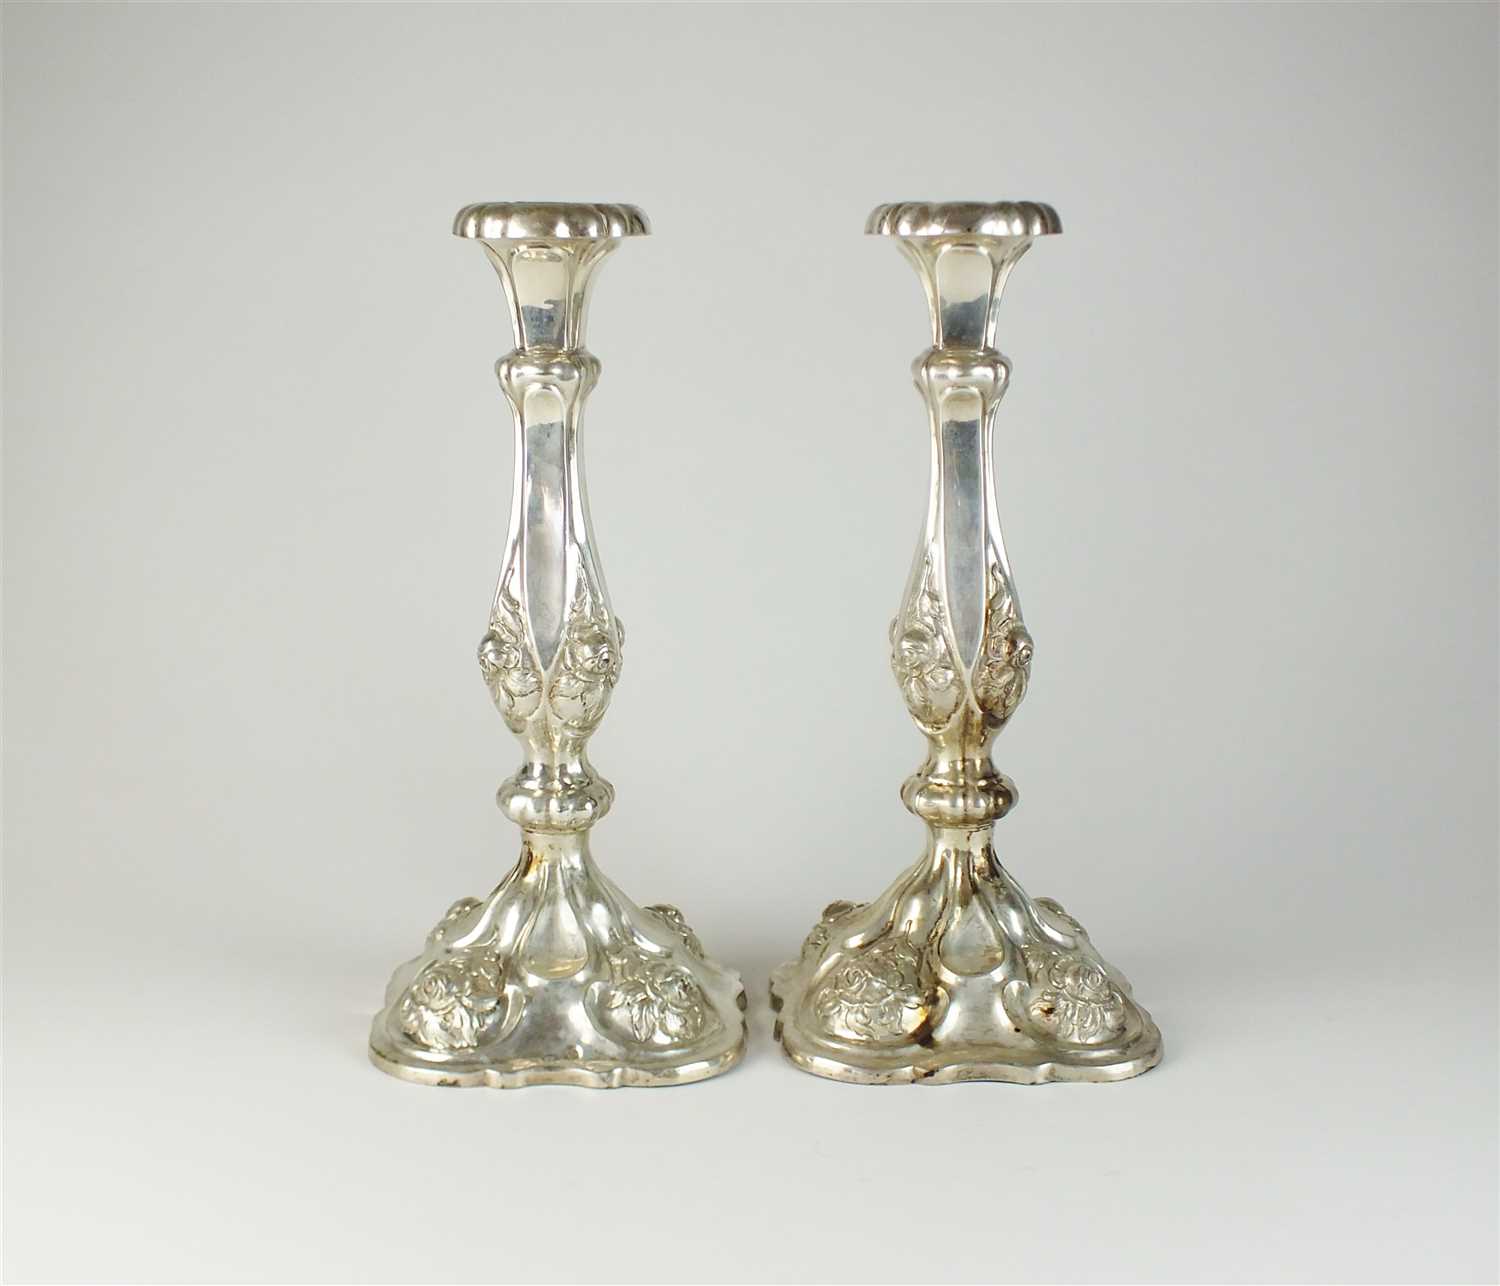 Lot 18 - A pair of 19th century Austro-Hungarian silver candlesticks